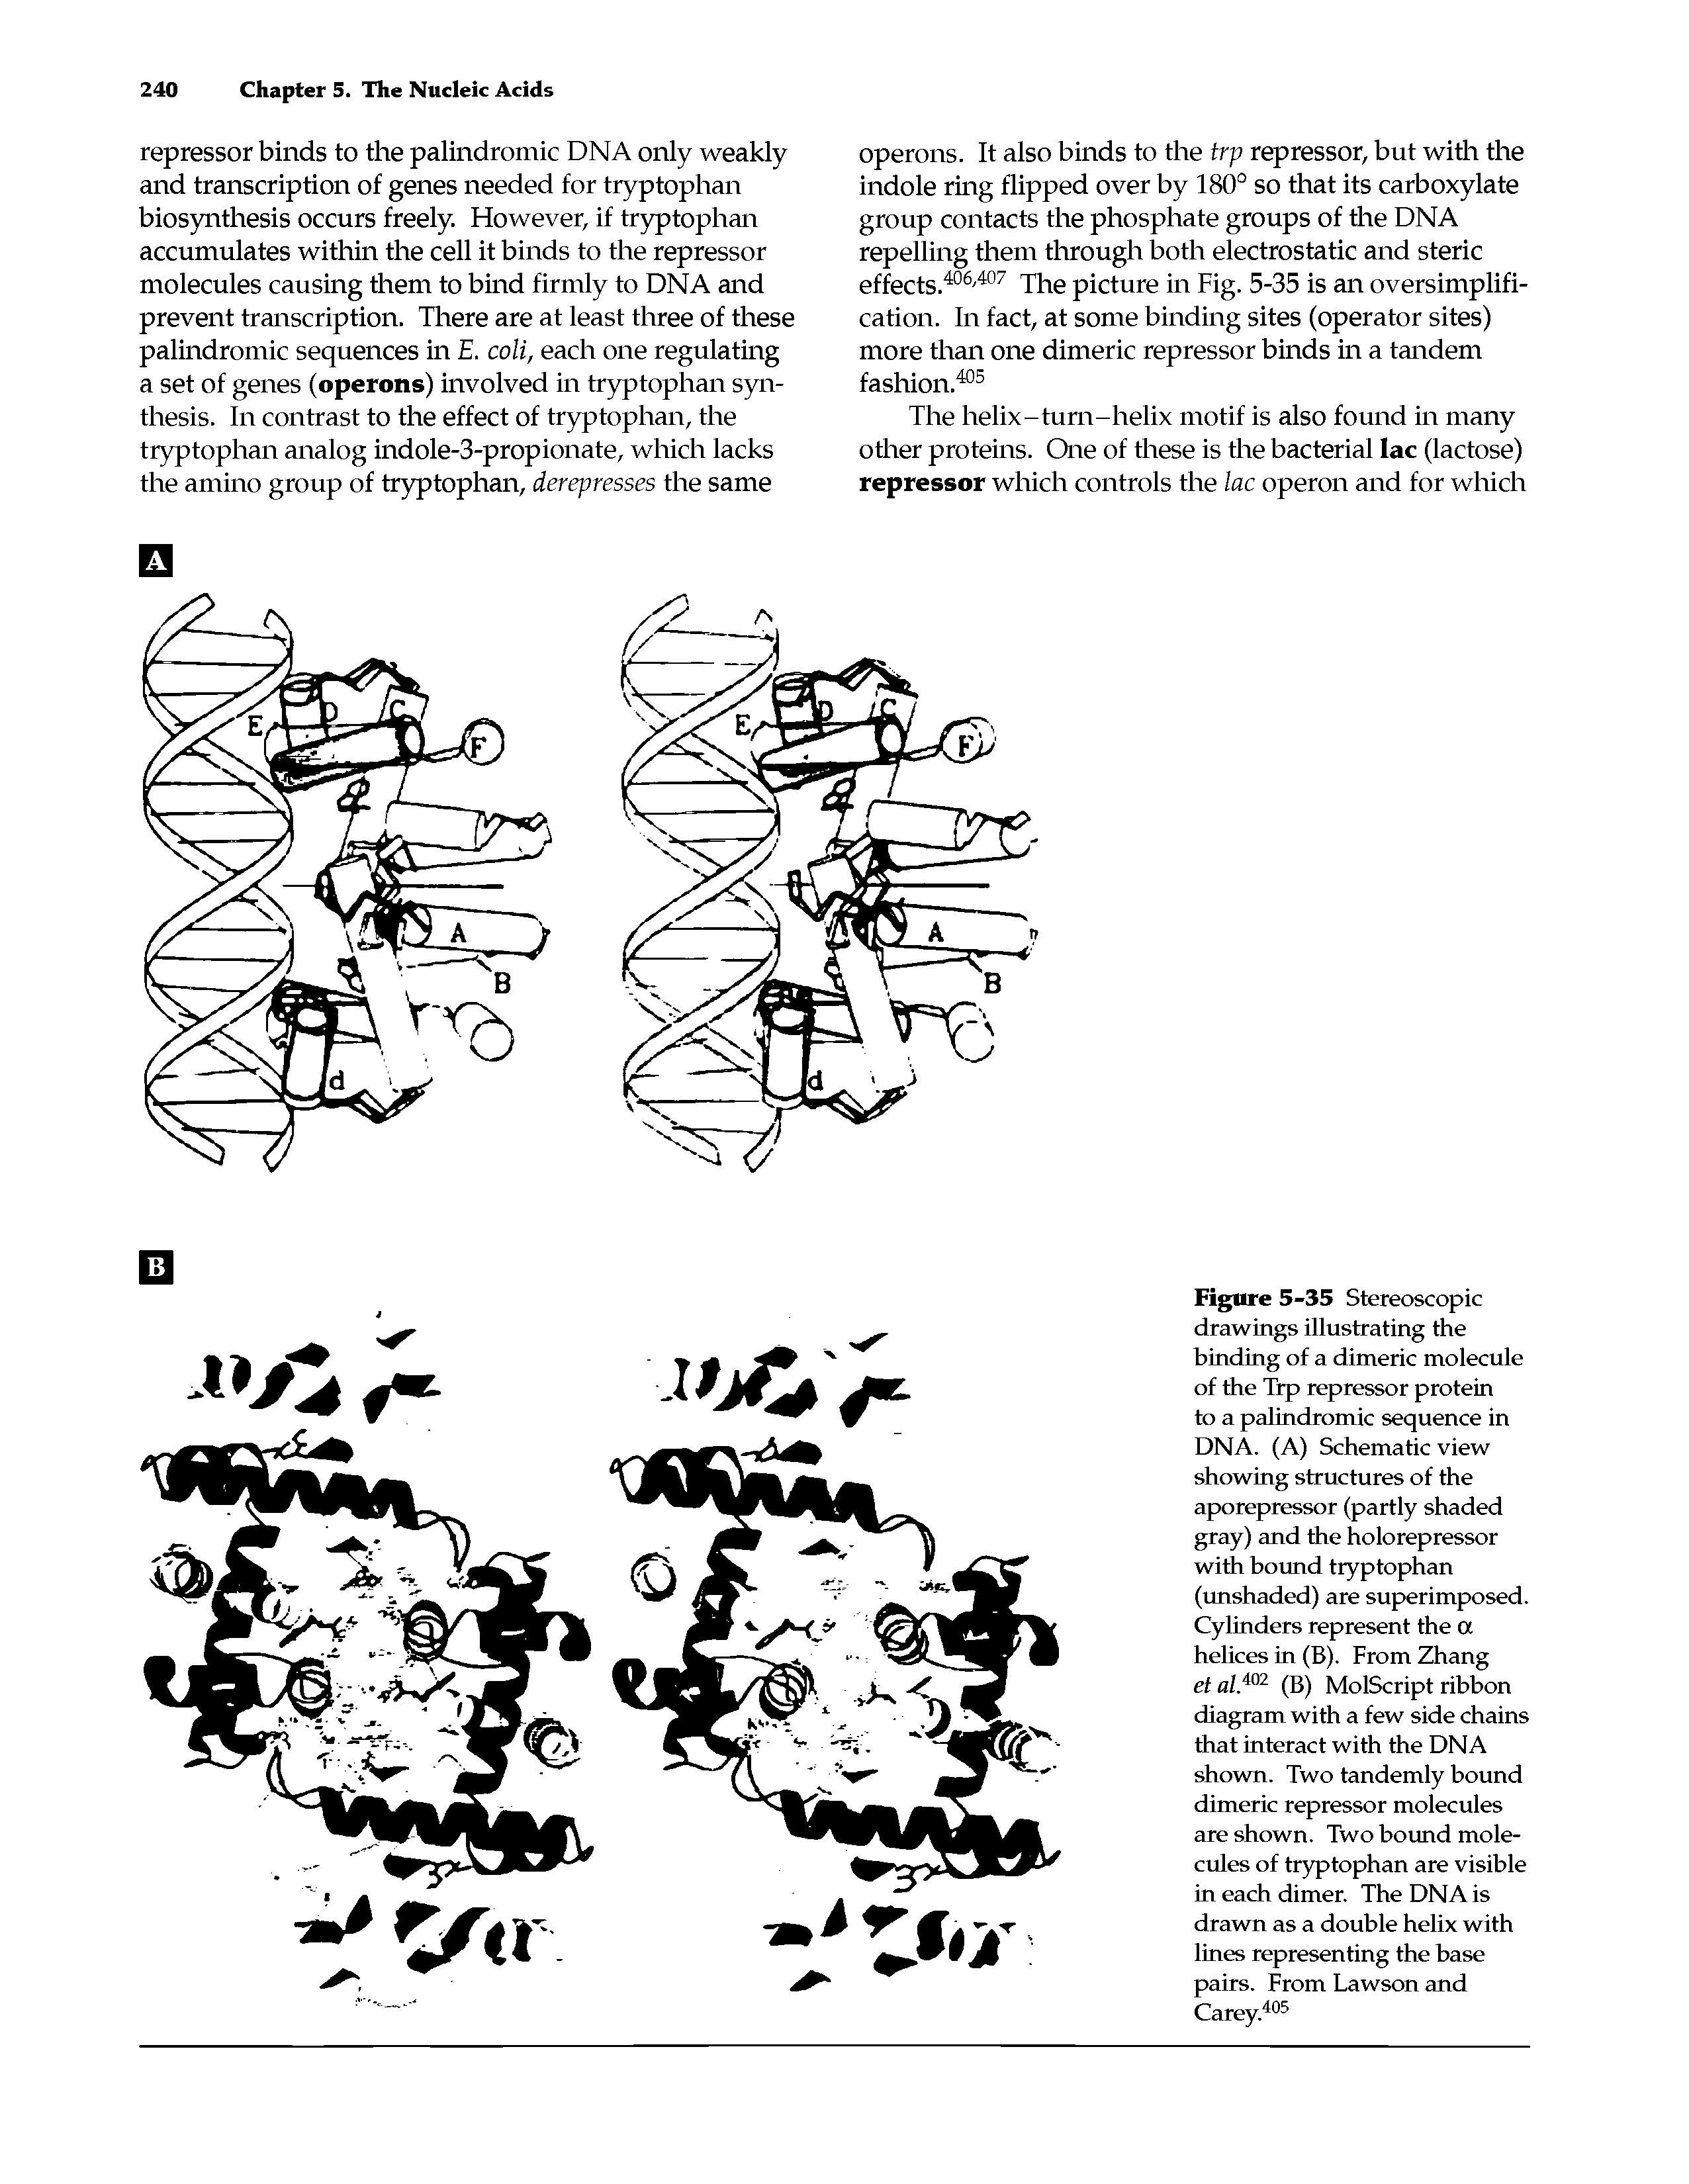 Figure 5-35 Stereoscopic drawings illustrating the binding of a dimeric molecule of the Trp repressor protein to a palindromic sequence in DNA. (A) Schematic view showing structures of the aporepressor (partly shaded gray) and the holorepressor with bound tryptophan (unshaded) are superimposed. Cylinders represent the a helices in (B). From Zhang et al.wi (B) MolScript ribbon diagram with a few side chains that interact with the DNA shown. Two tandemly bound dimeric repressor molecules are shown. Two bound molecules of tryptophan are visible in each dimer. The DNA is drawn as a double helix with lines representing the base pairs. From Lawson and Carey.405...